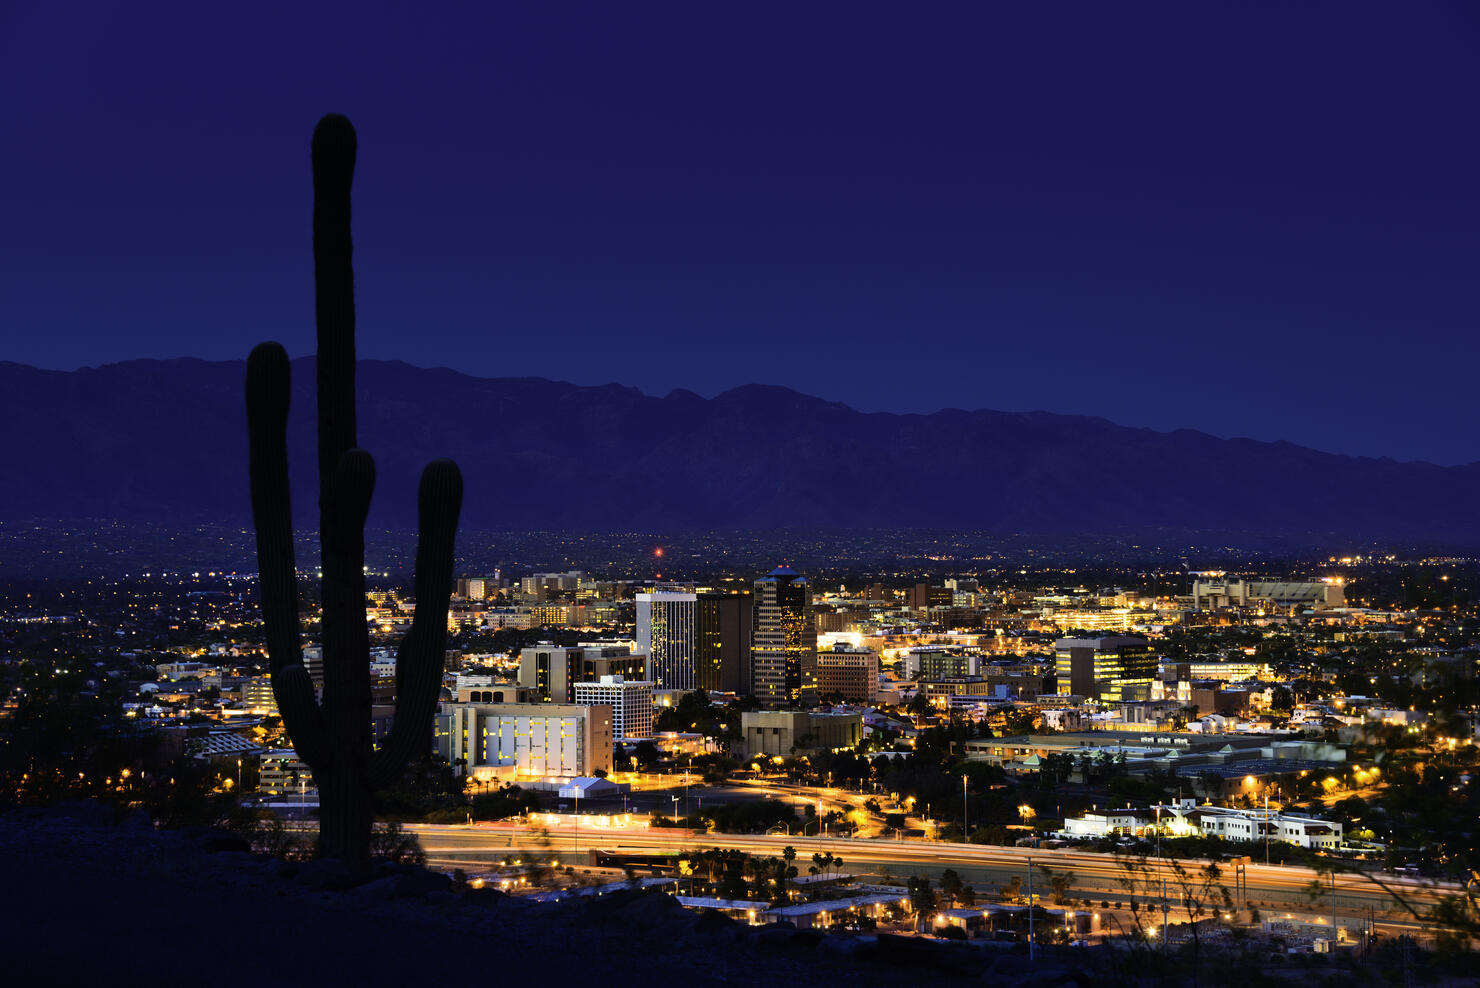 Tucson Arizona at night framed by saguaro cactus and mountains